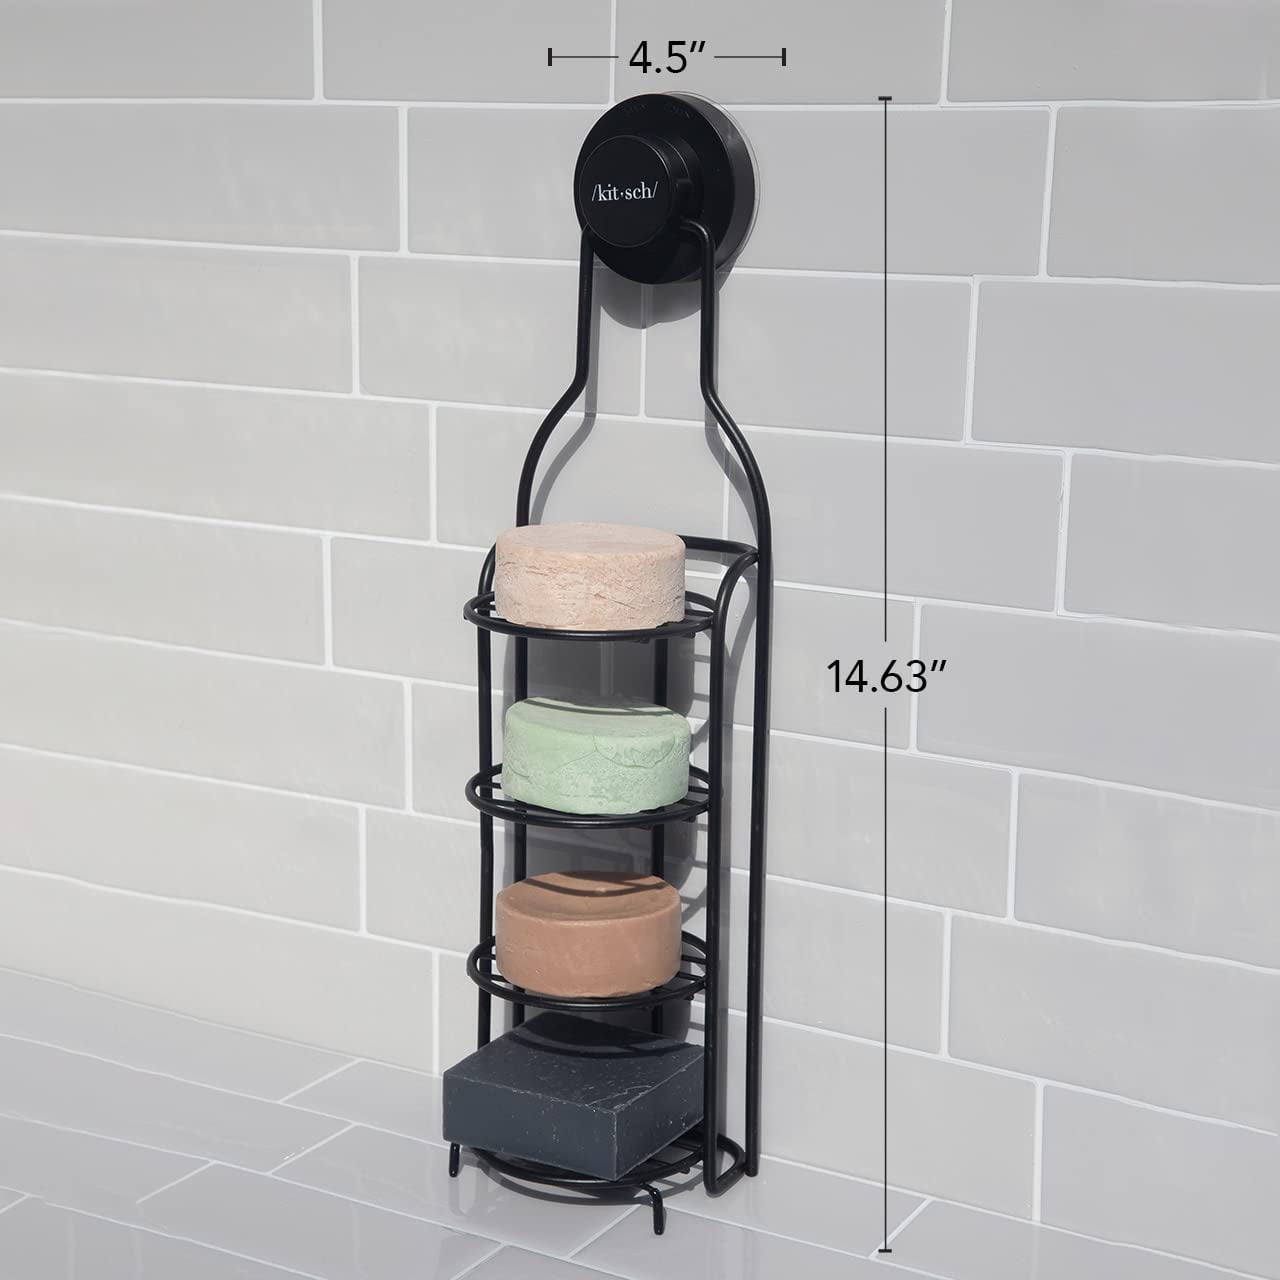 KITSCH Self-Drain Shower Caddy  Urban Outfitters Mexico - Clothing, Music,  Home & Accessories